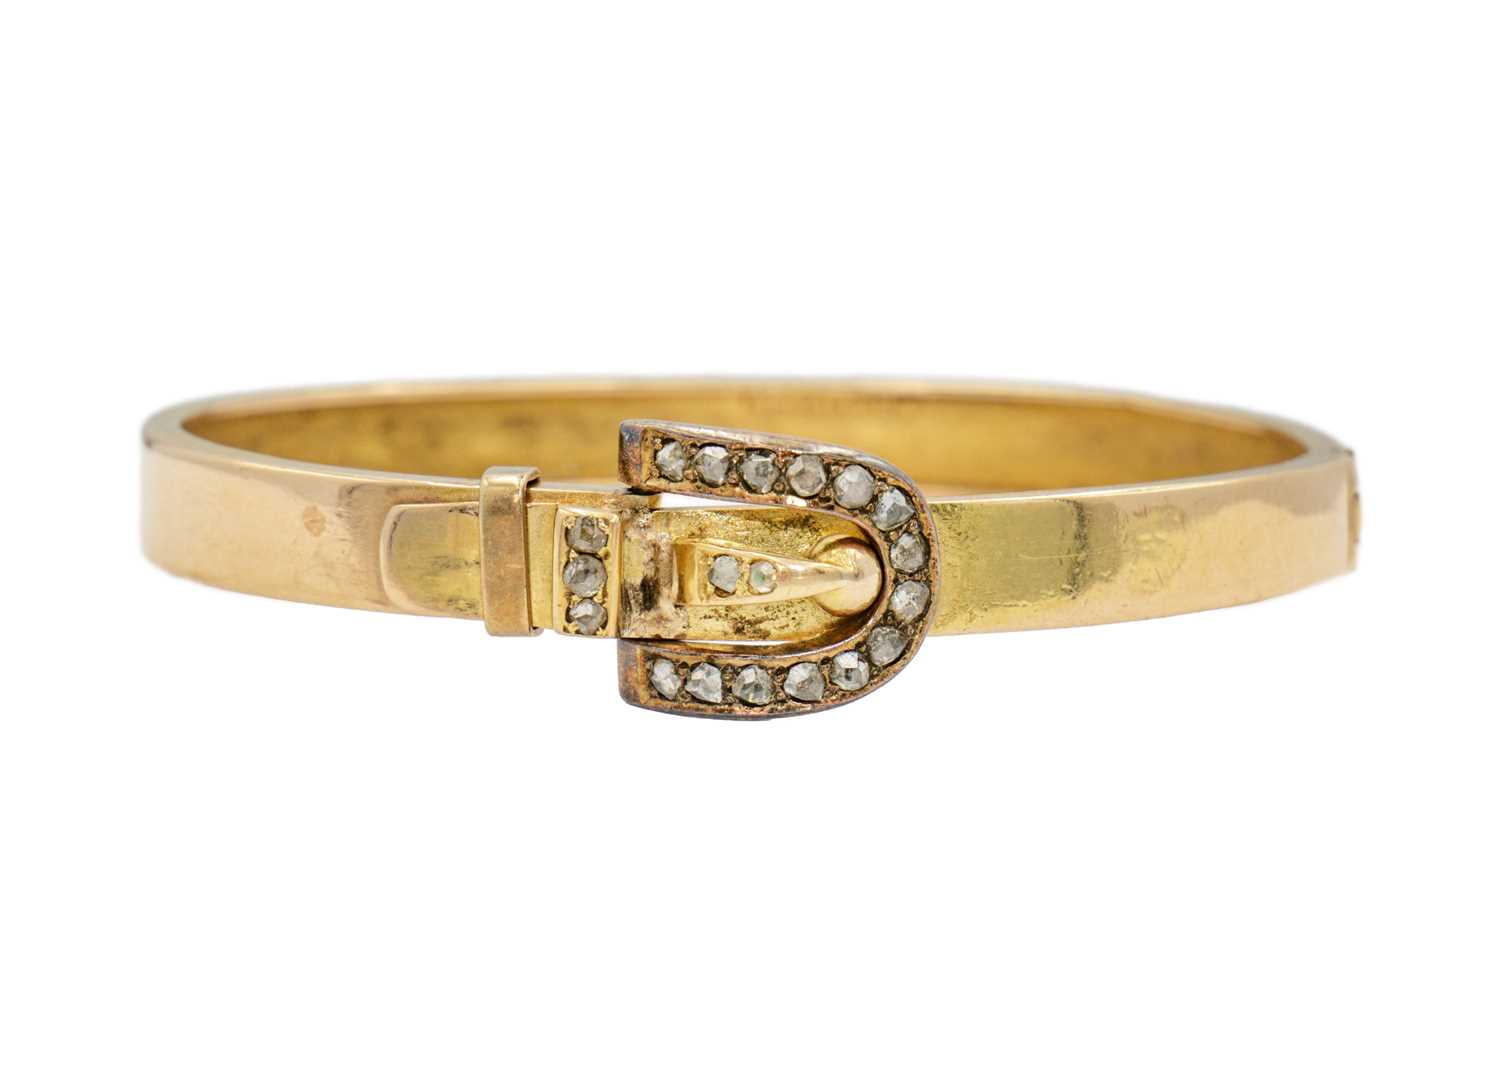 A Victorian gold hinged bangle diamond set with a buckle design clasp, signed DENIS BRO.